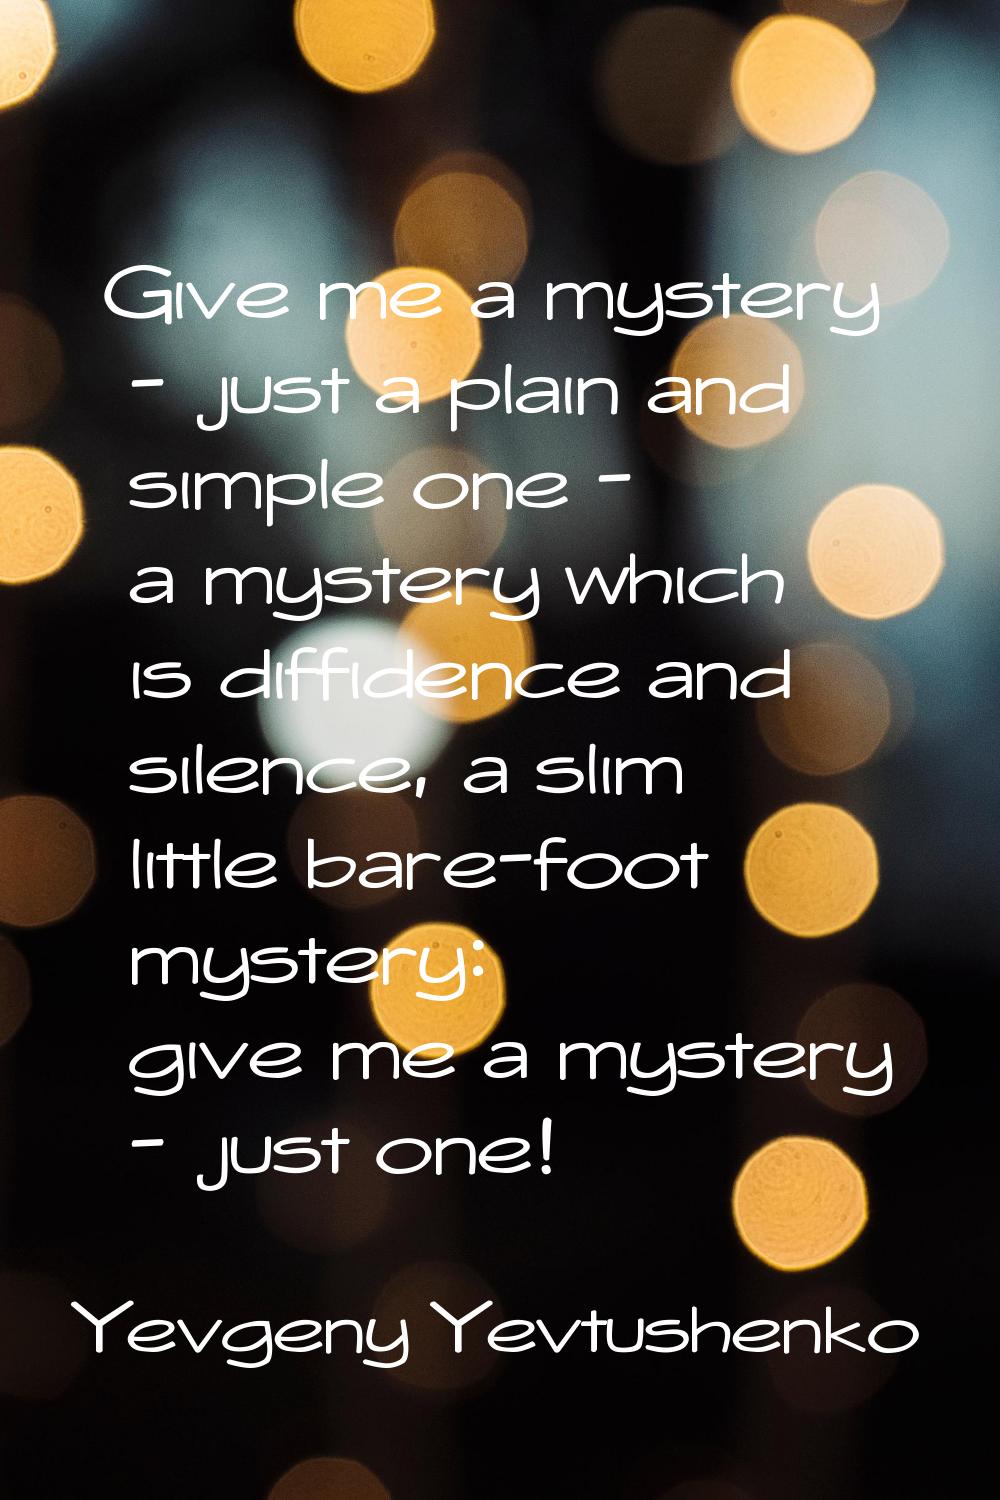 Give me a mystery - just a plain and simple one - a mystery which is diffidence and silence, a slim